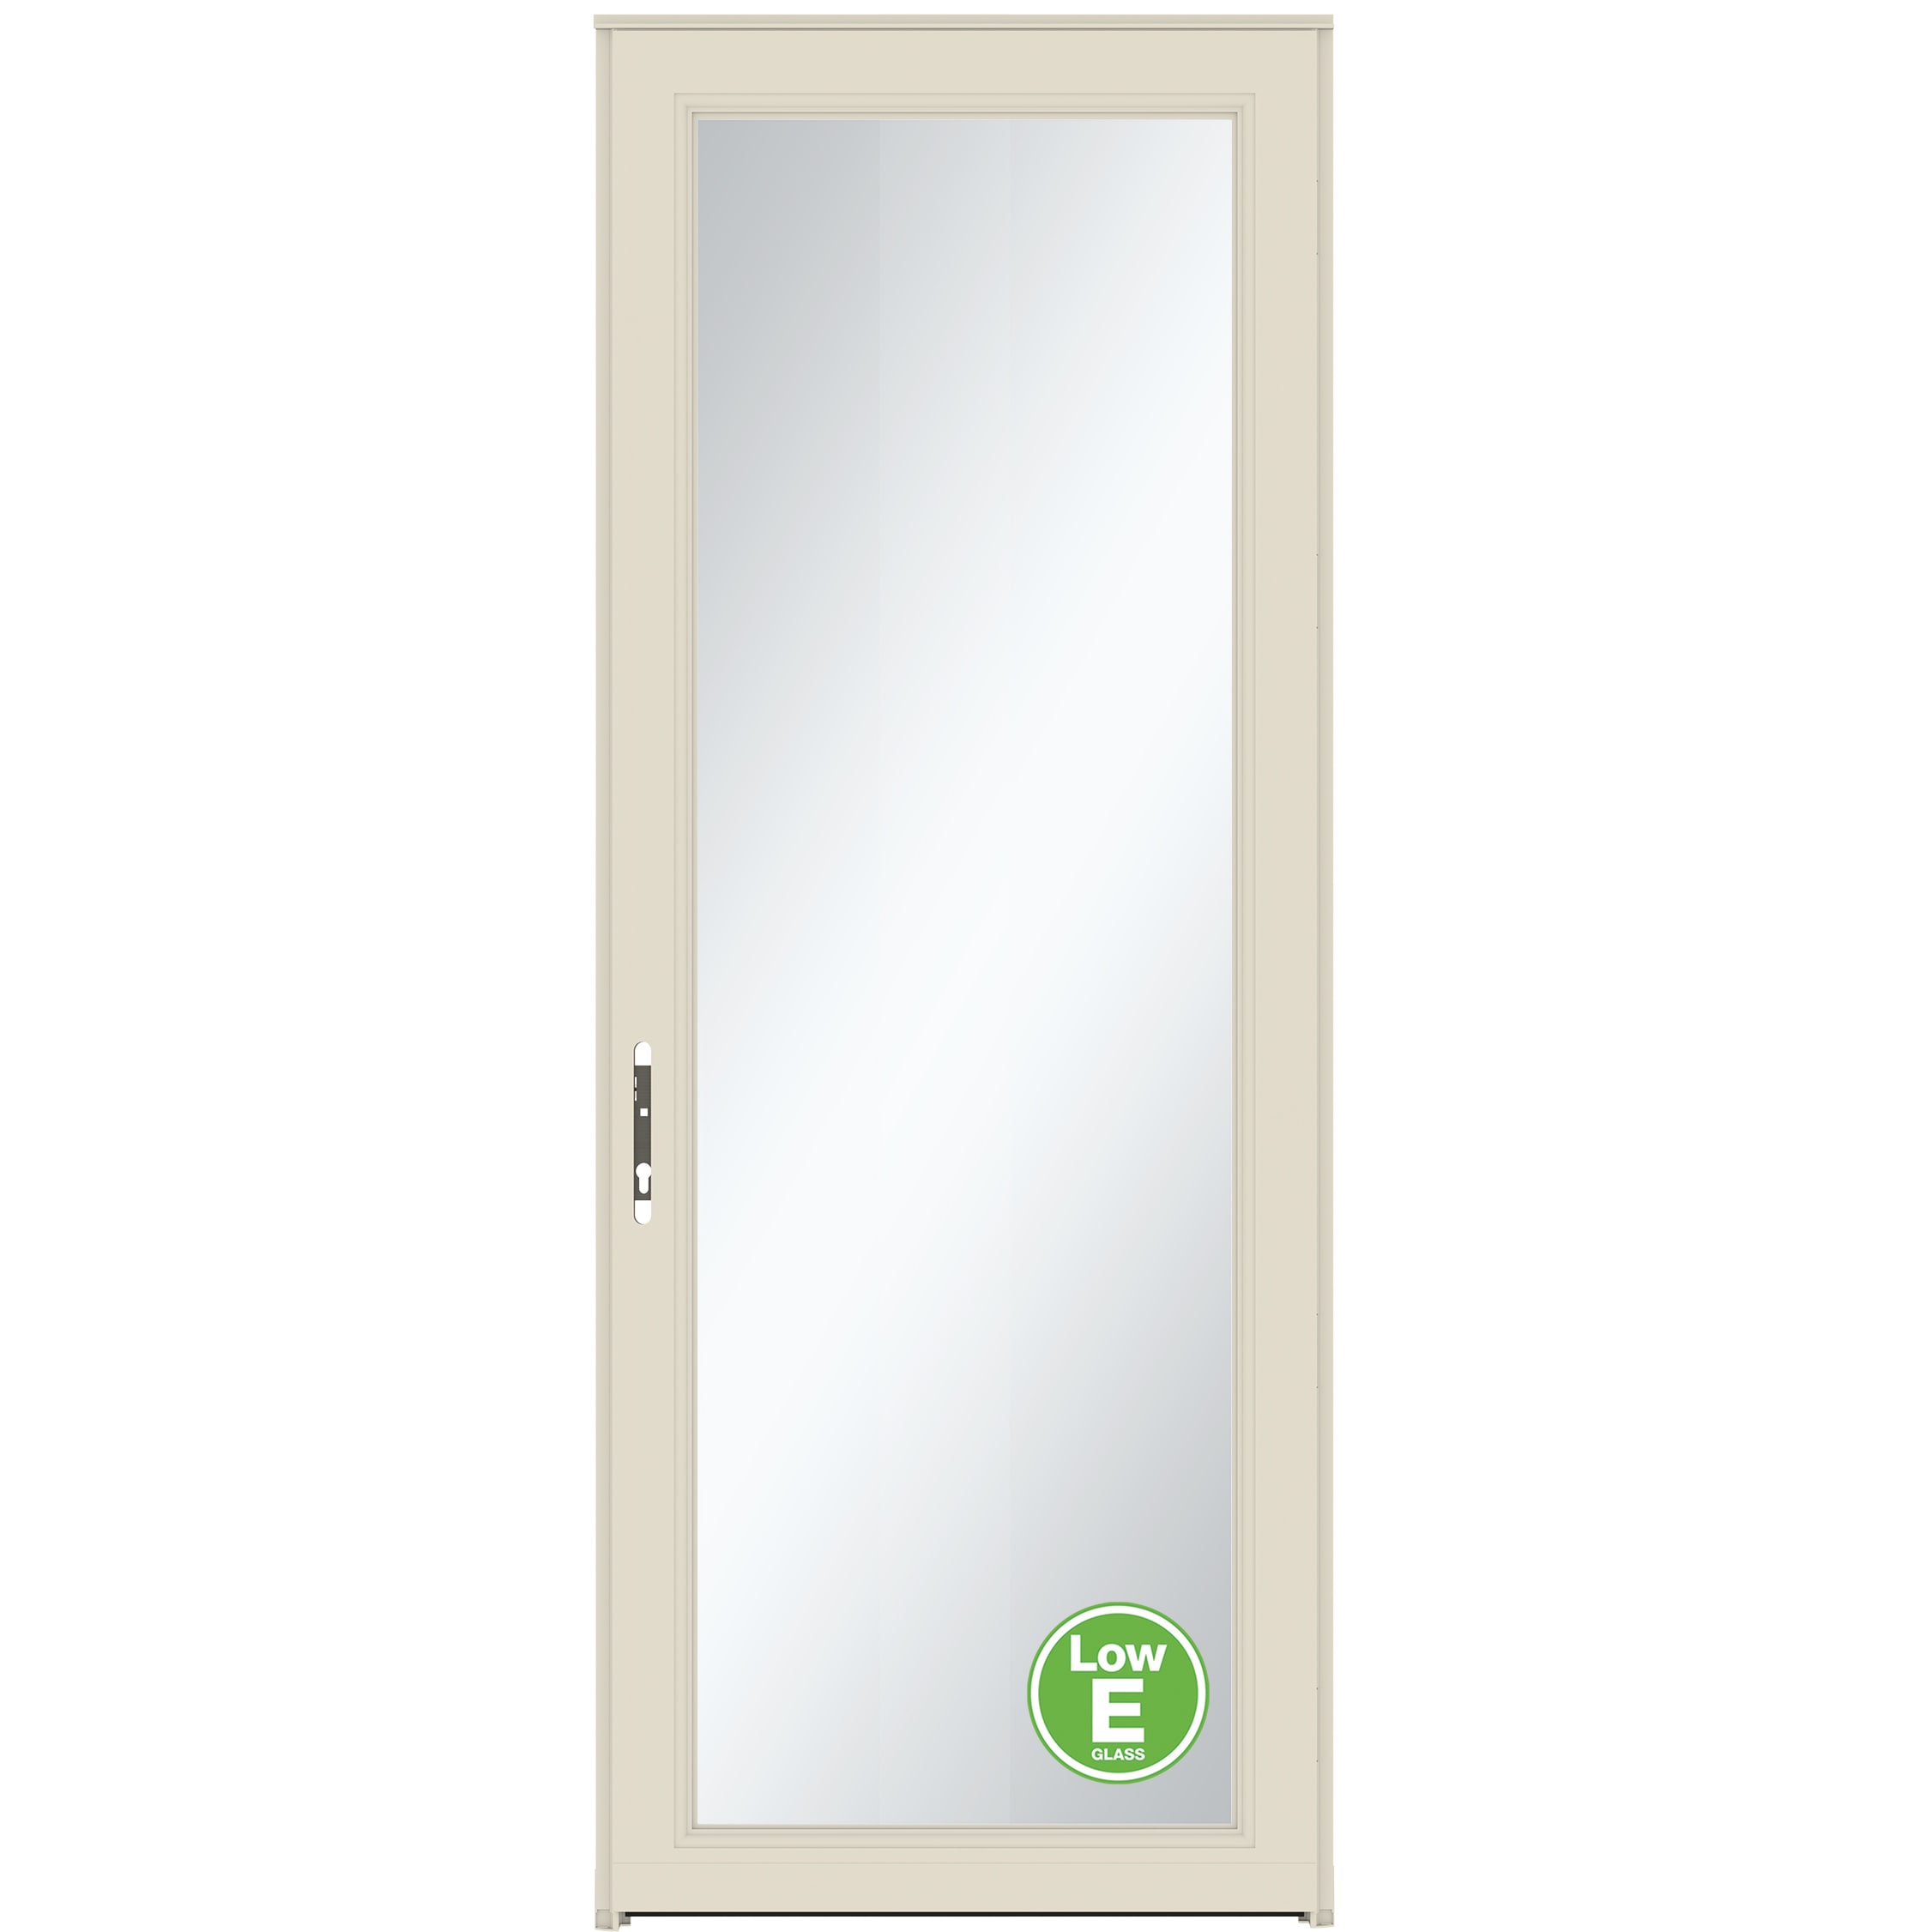 Signature Selection Low-E 36-in x 96-in Almond Full-view Interchangeable Screen Aluminum Storm Door in Off-White | - LARSON 14904089RE